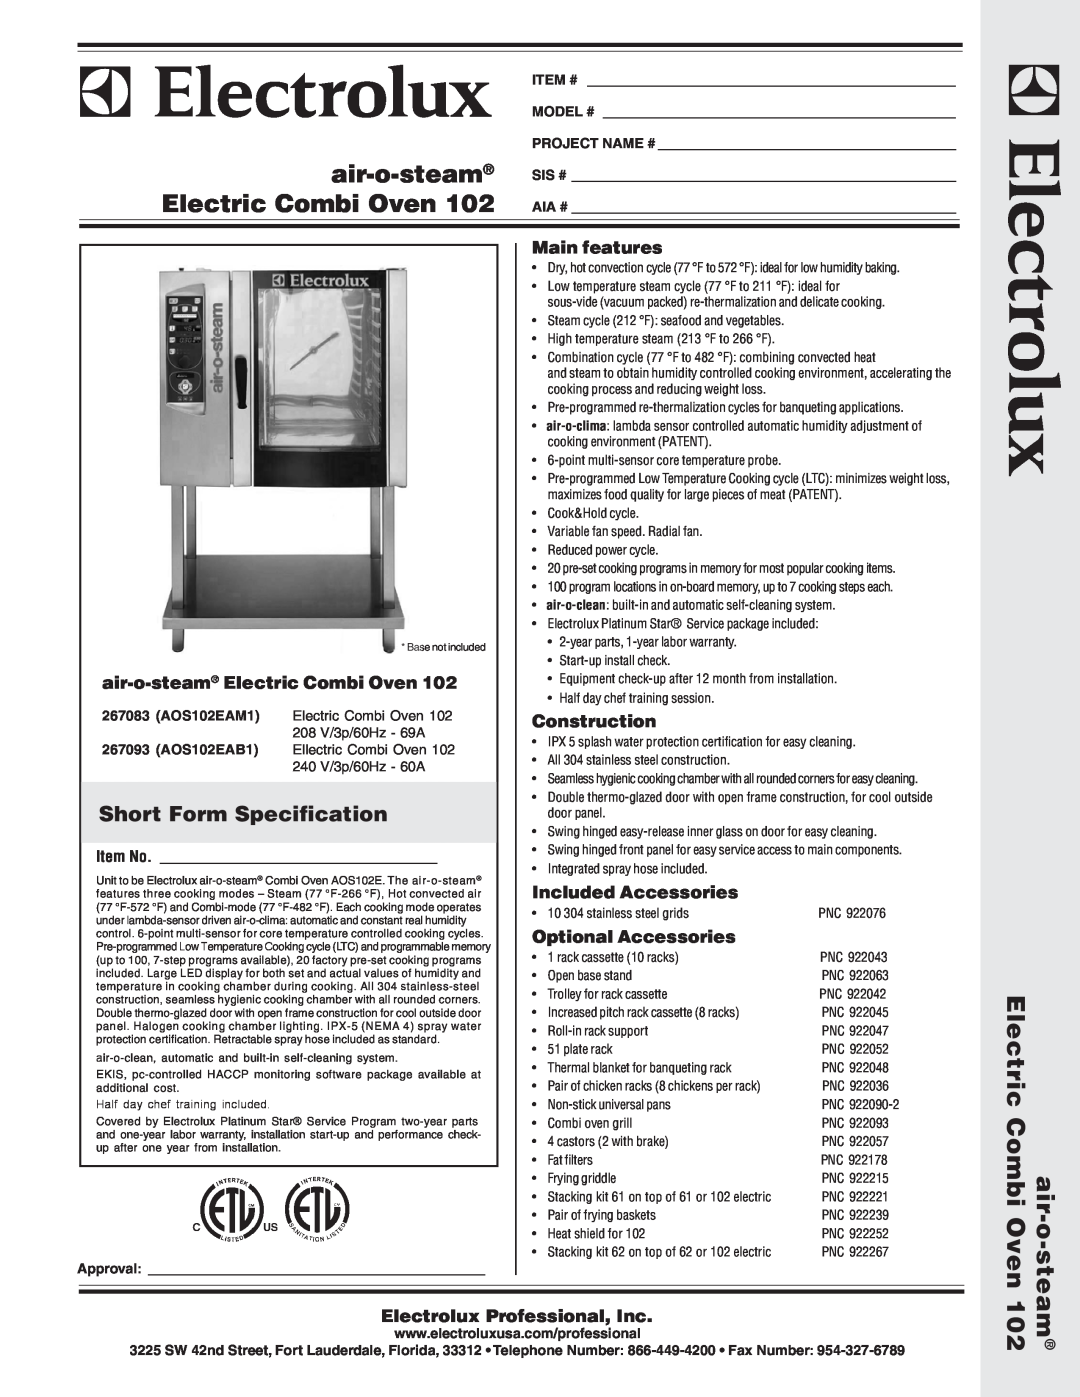 Electrolux AOS102EAB1 warranty Short Form Specification, air-o-steam Electric Combi Oven, Main features, Construction 